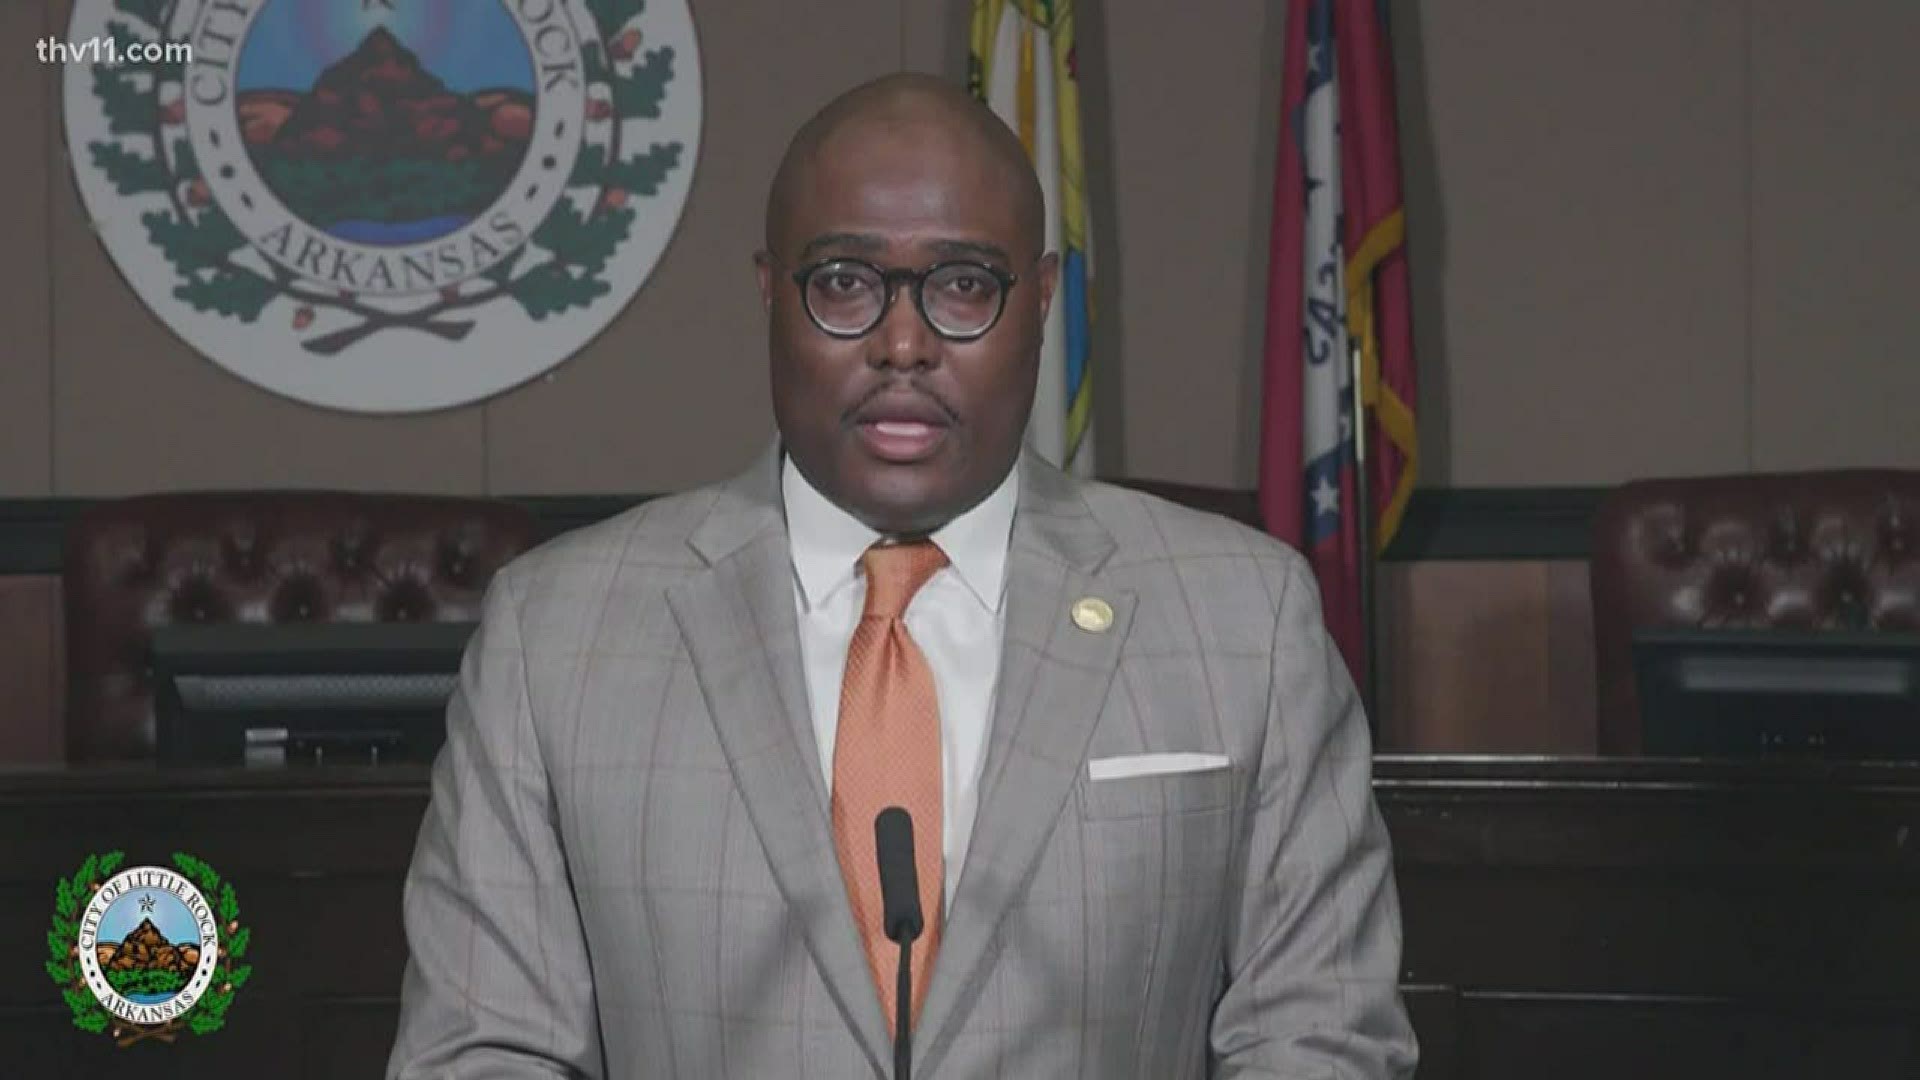 Little Rock Mayor Frank Scott Jr. is calling for an independent review of the LRPD after three lawsuits were fired against the chief of police.